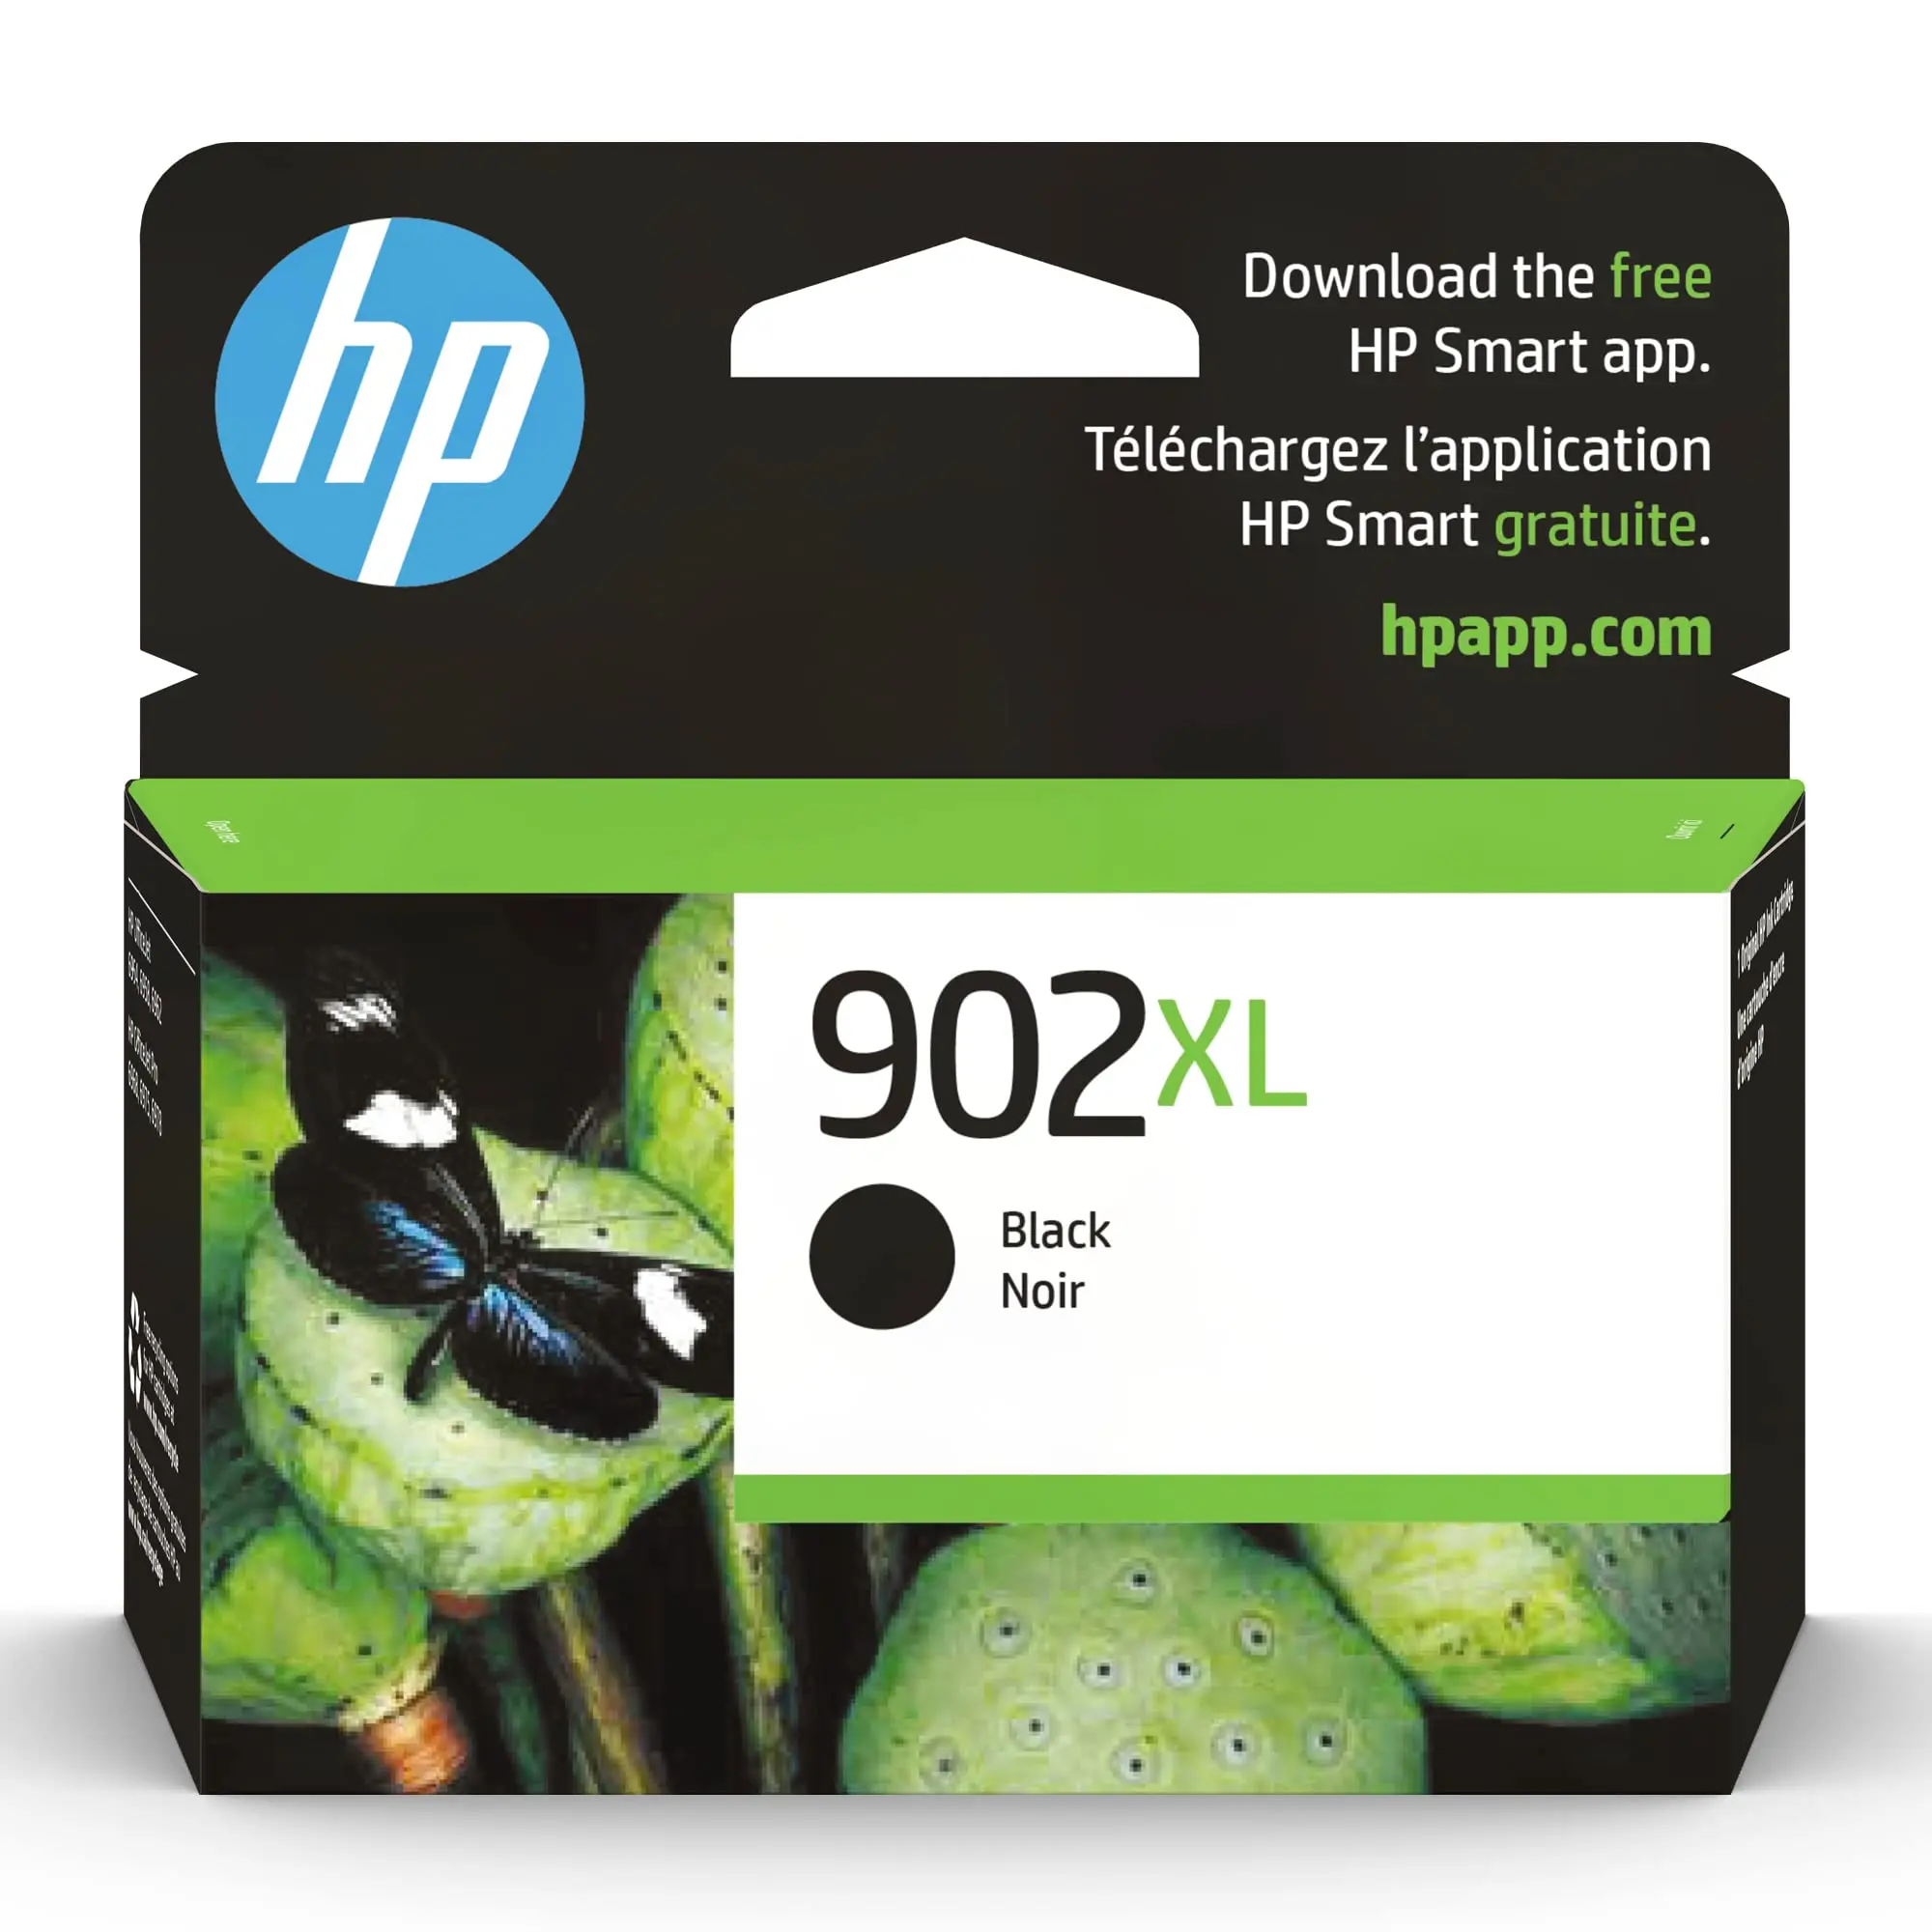 Hp 902xl: the ultimate printer cartridge for high-quality printing